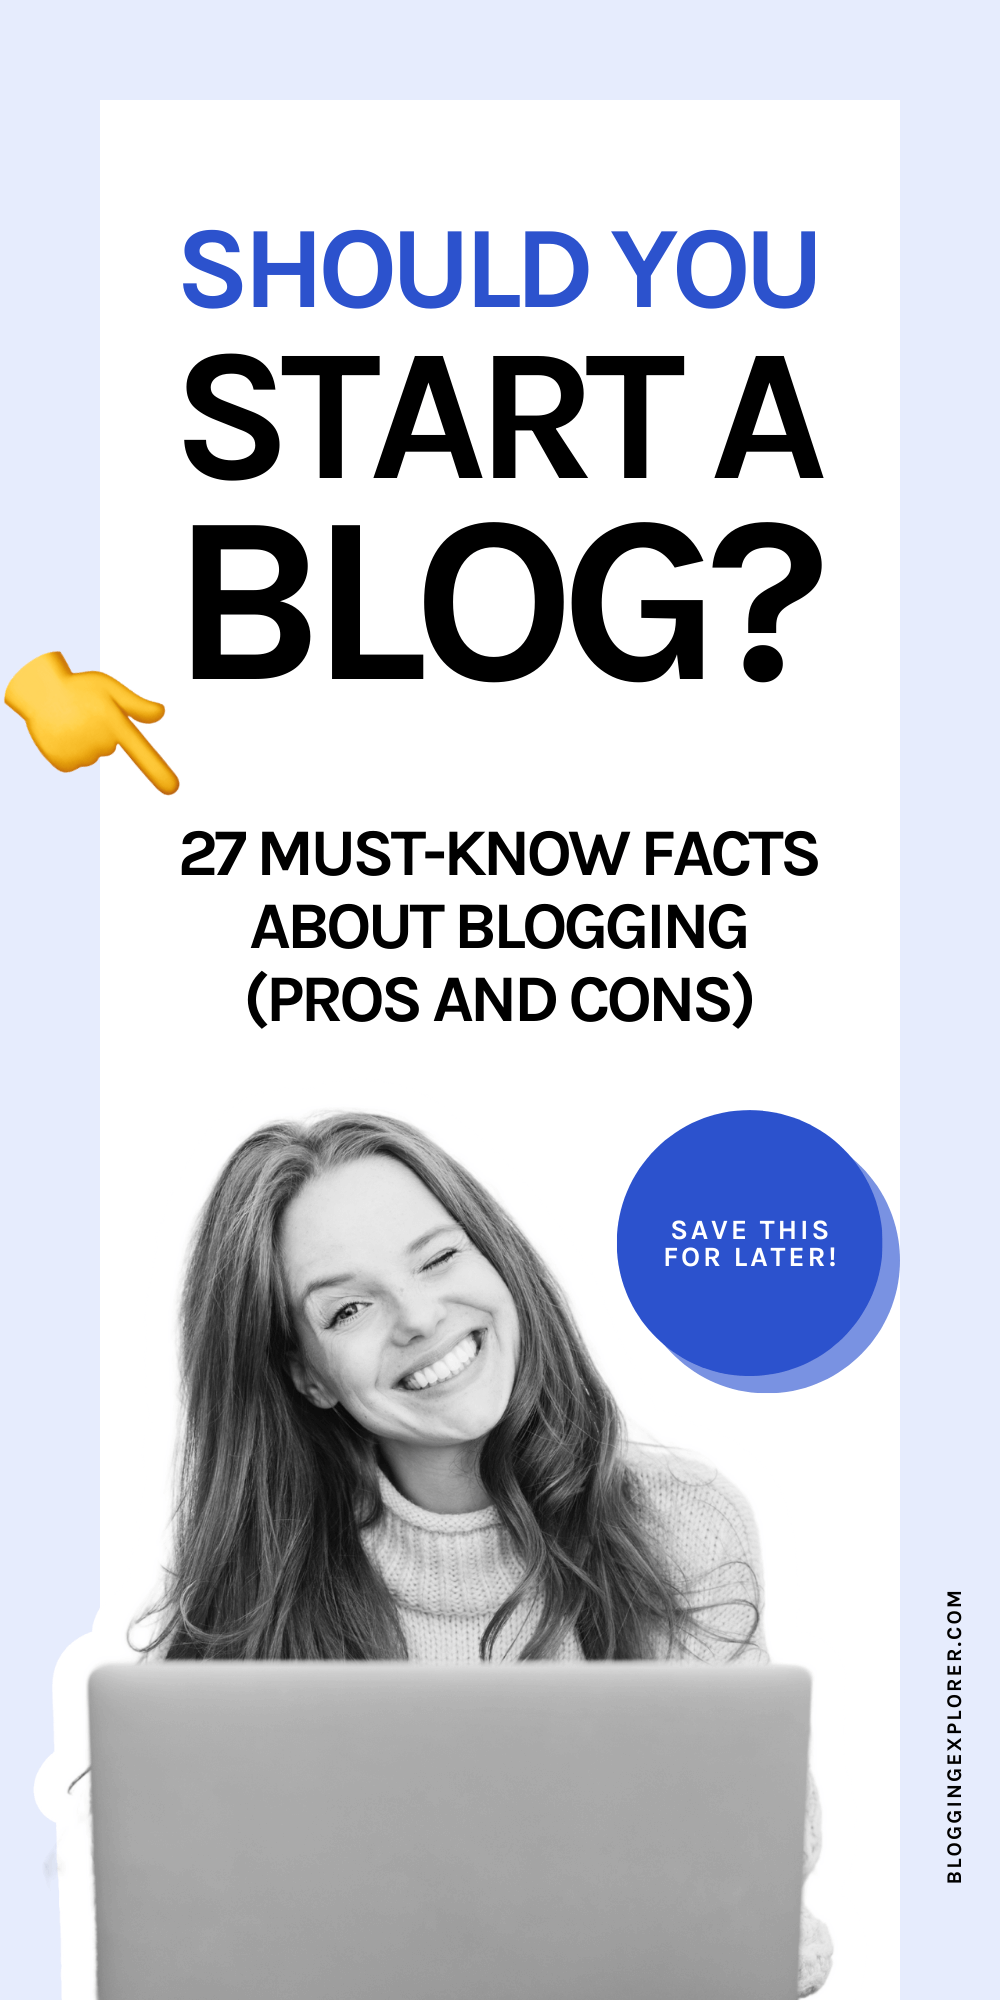 Should you start a blog? 27 must-know facts and pros and cons about blogging